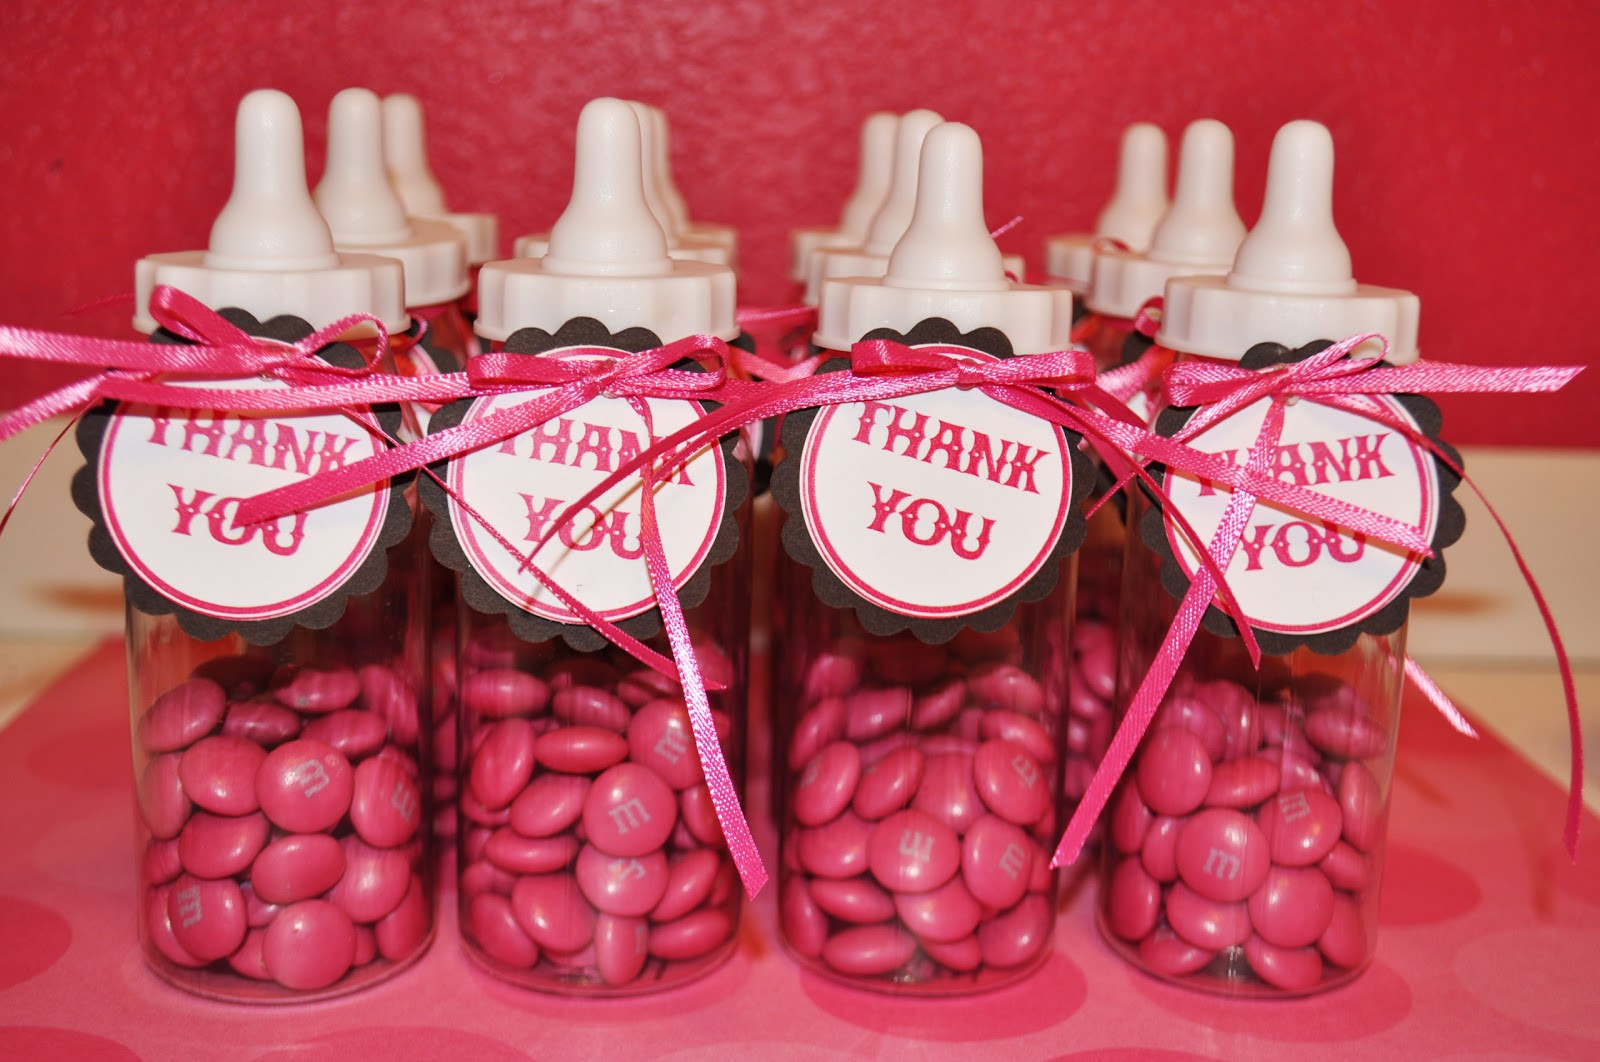 Baby Shower Party Gift Ideas
 The Autocrat Baby Shower Favors Mini Bottles